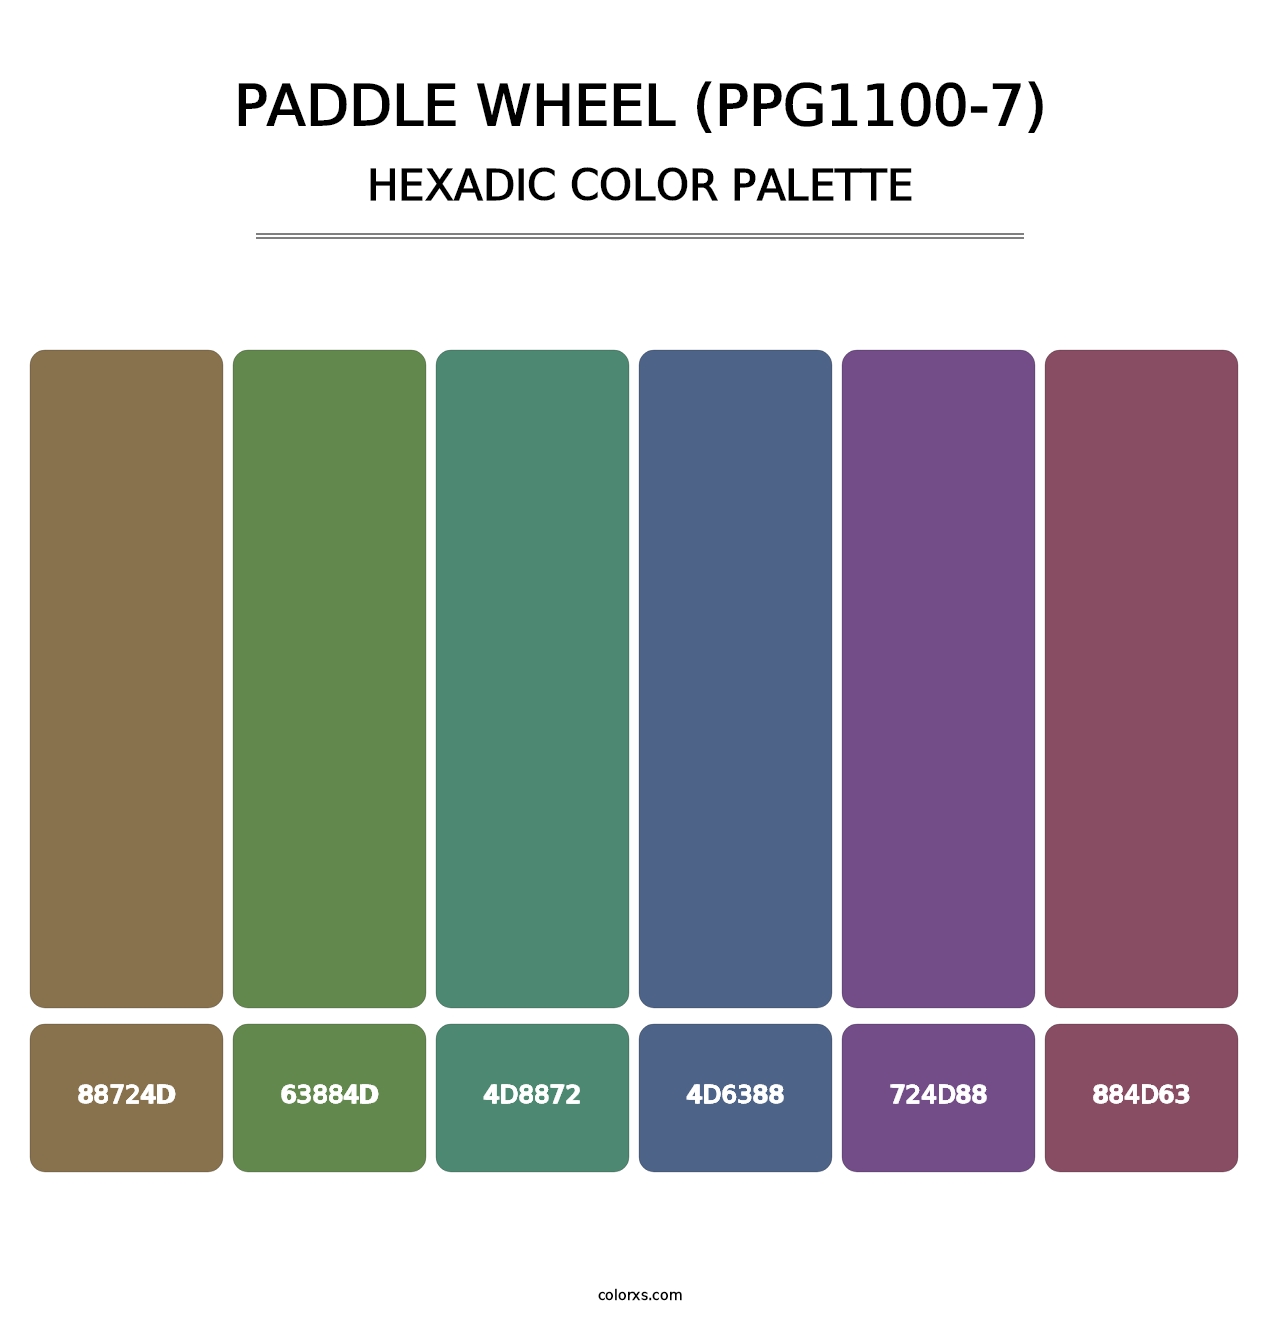 Paddle Wheel (PPG1100-7) - Hexadic Color Palette